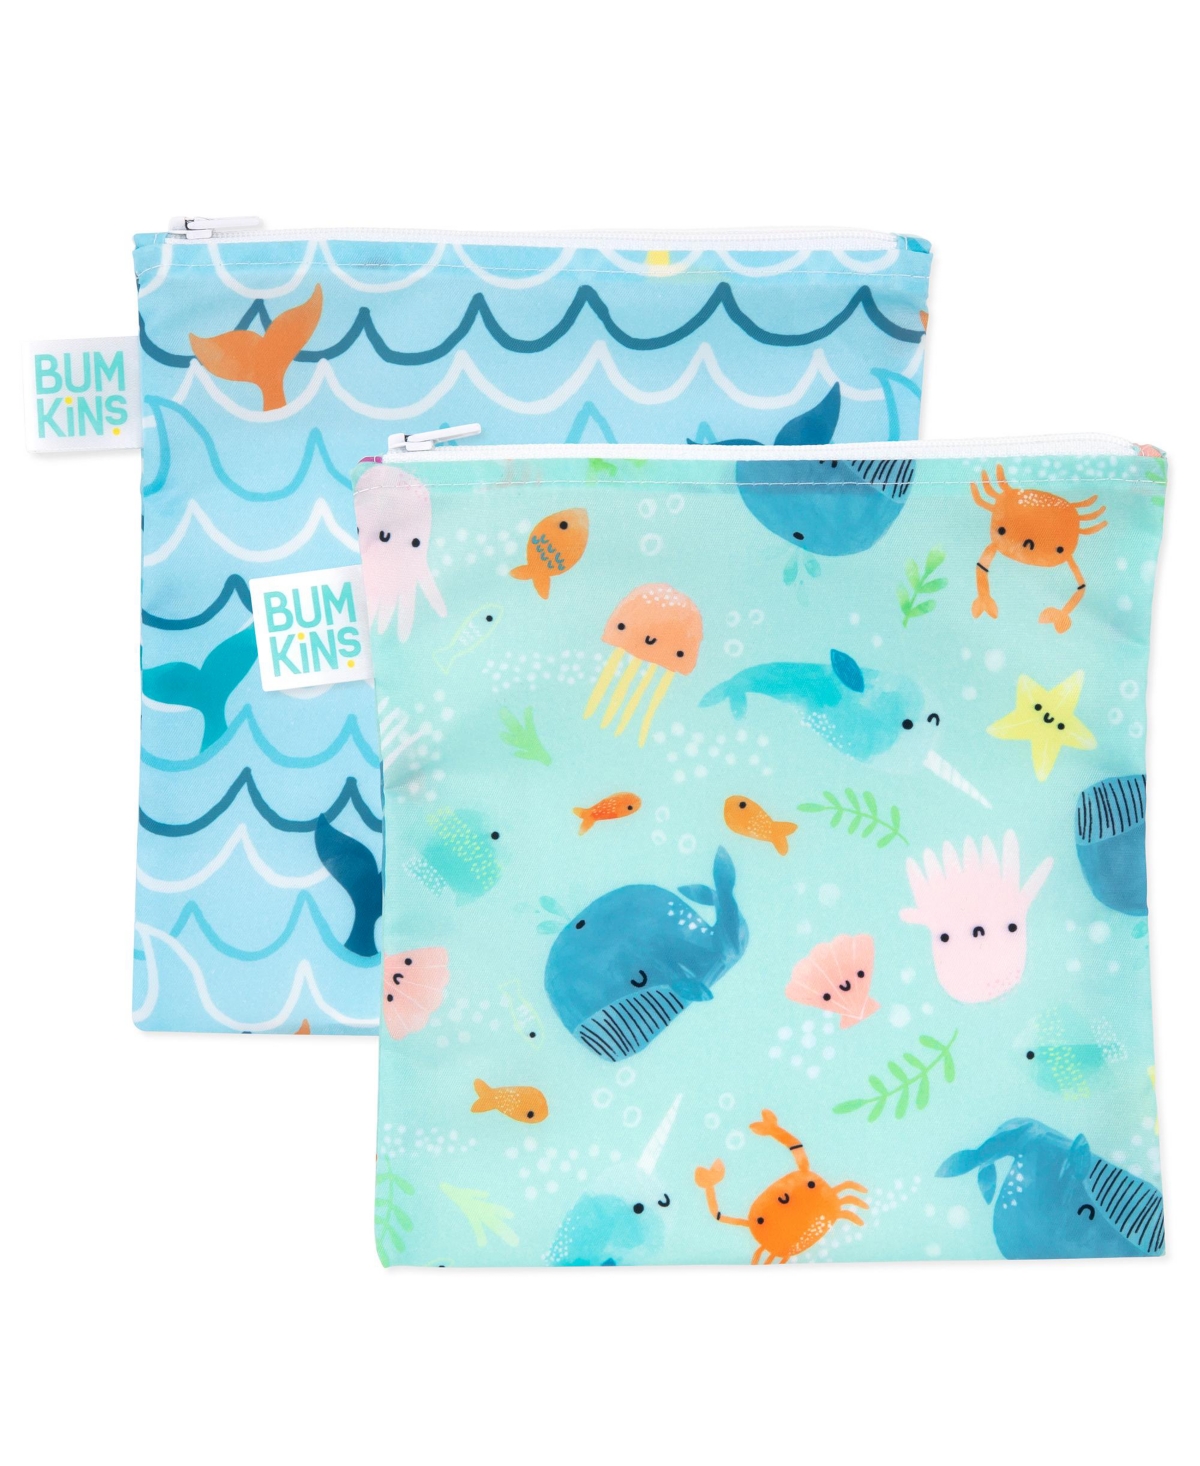 Bumkins 2-pack Reusable Sandwich Bags In Ocean Life Whale Tail